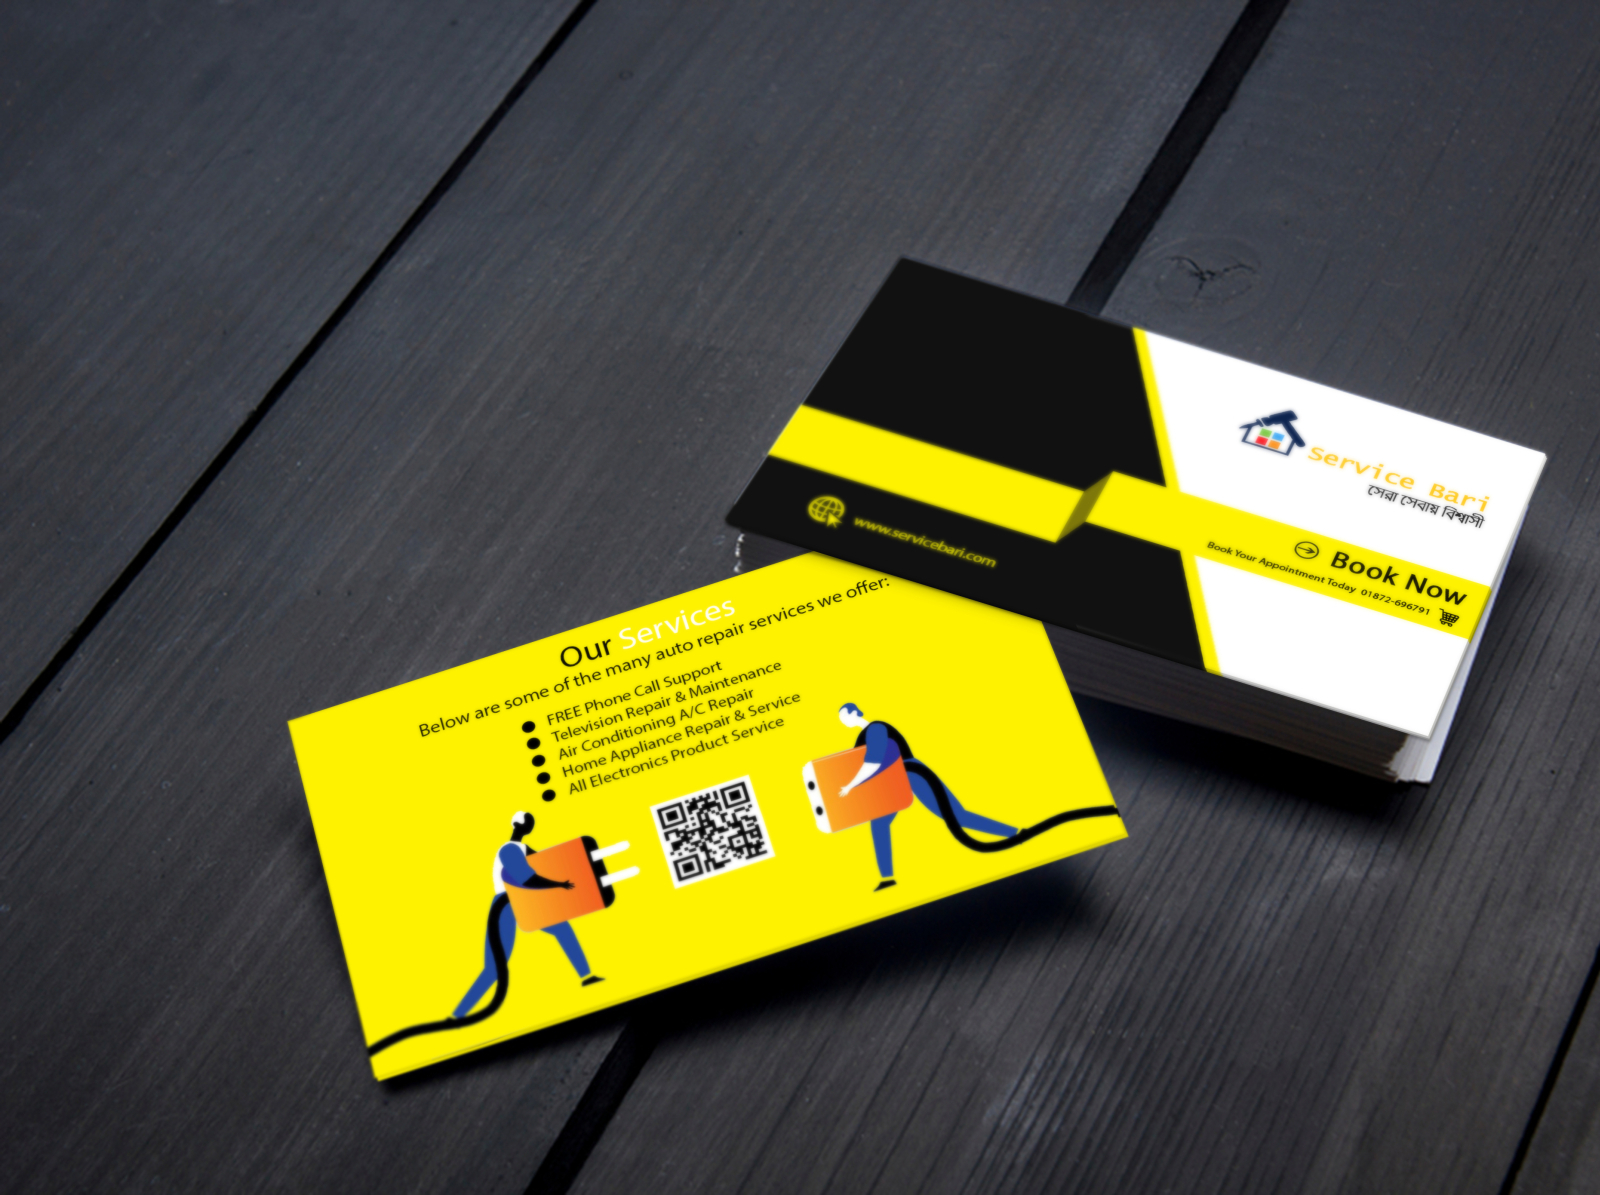 Service Bari Business Card by Sumit Mondal on Dribbble